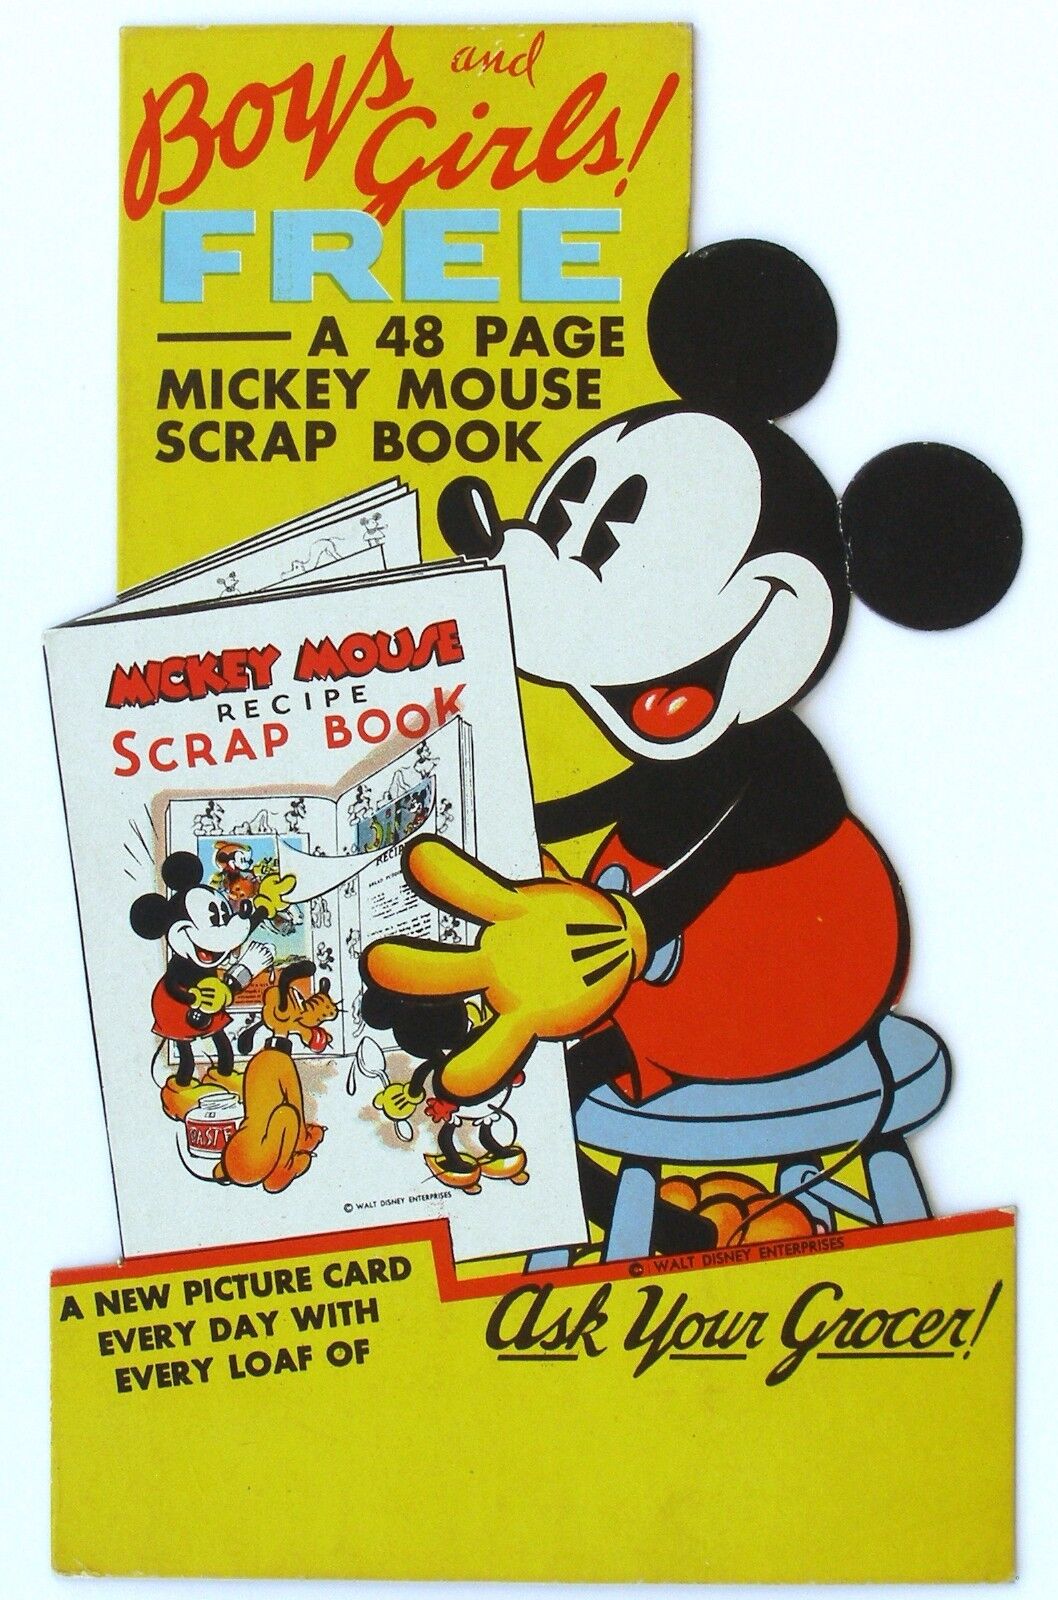 1930's Die Cut Cardboard Advertising for Mickey Mouse Recipe Scrapbook